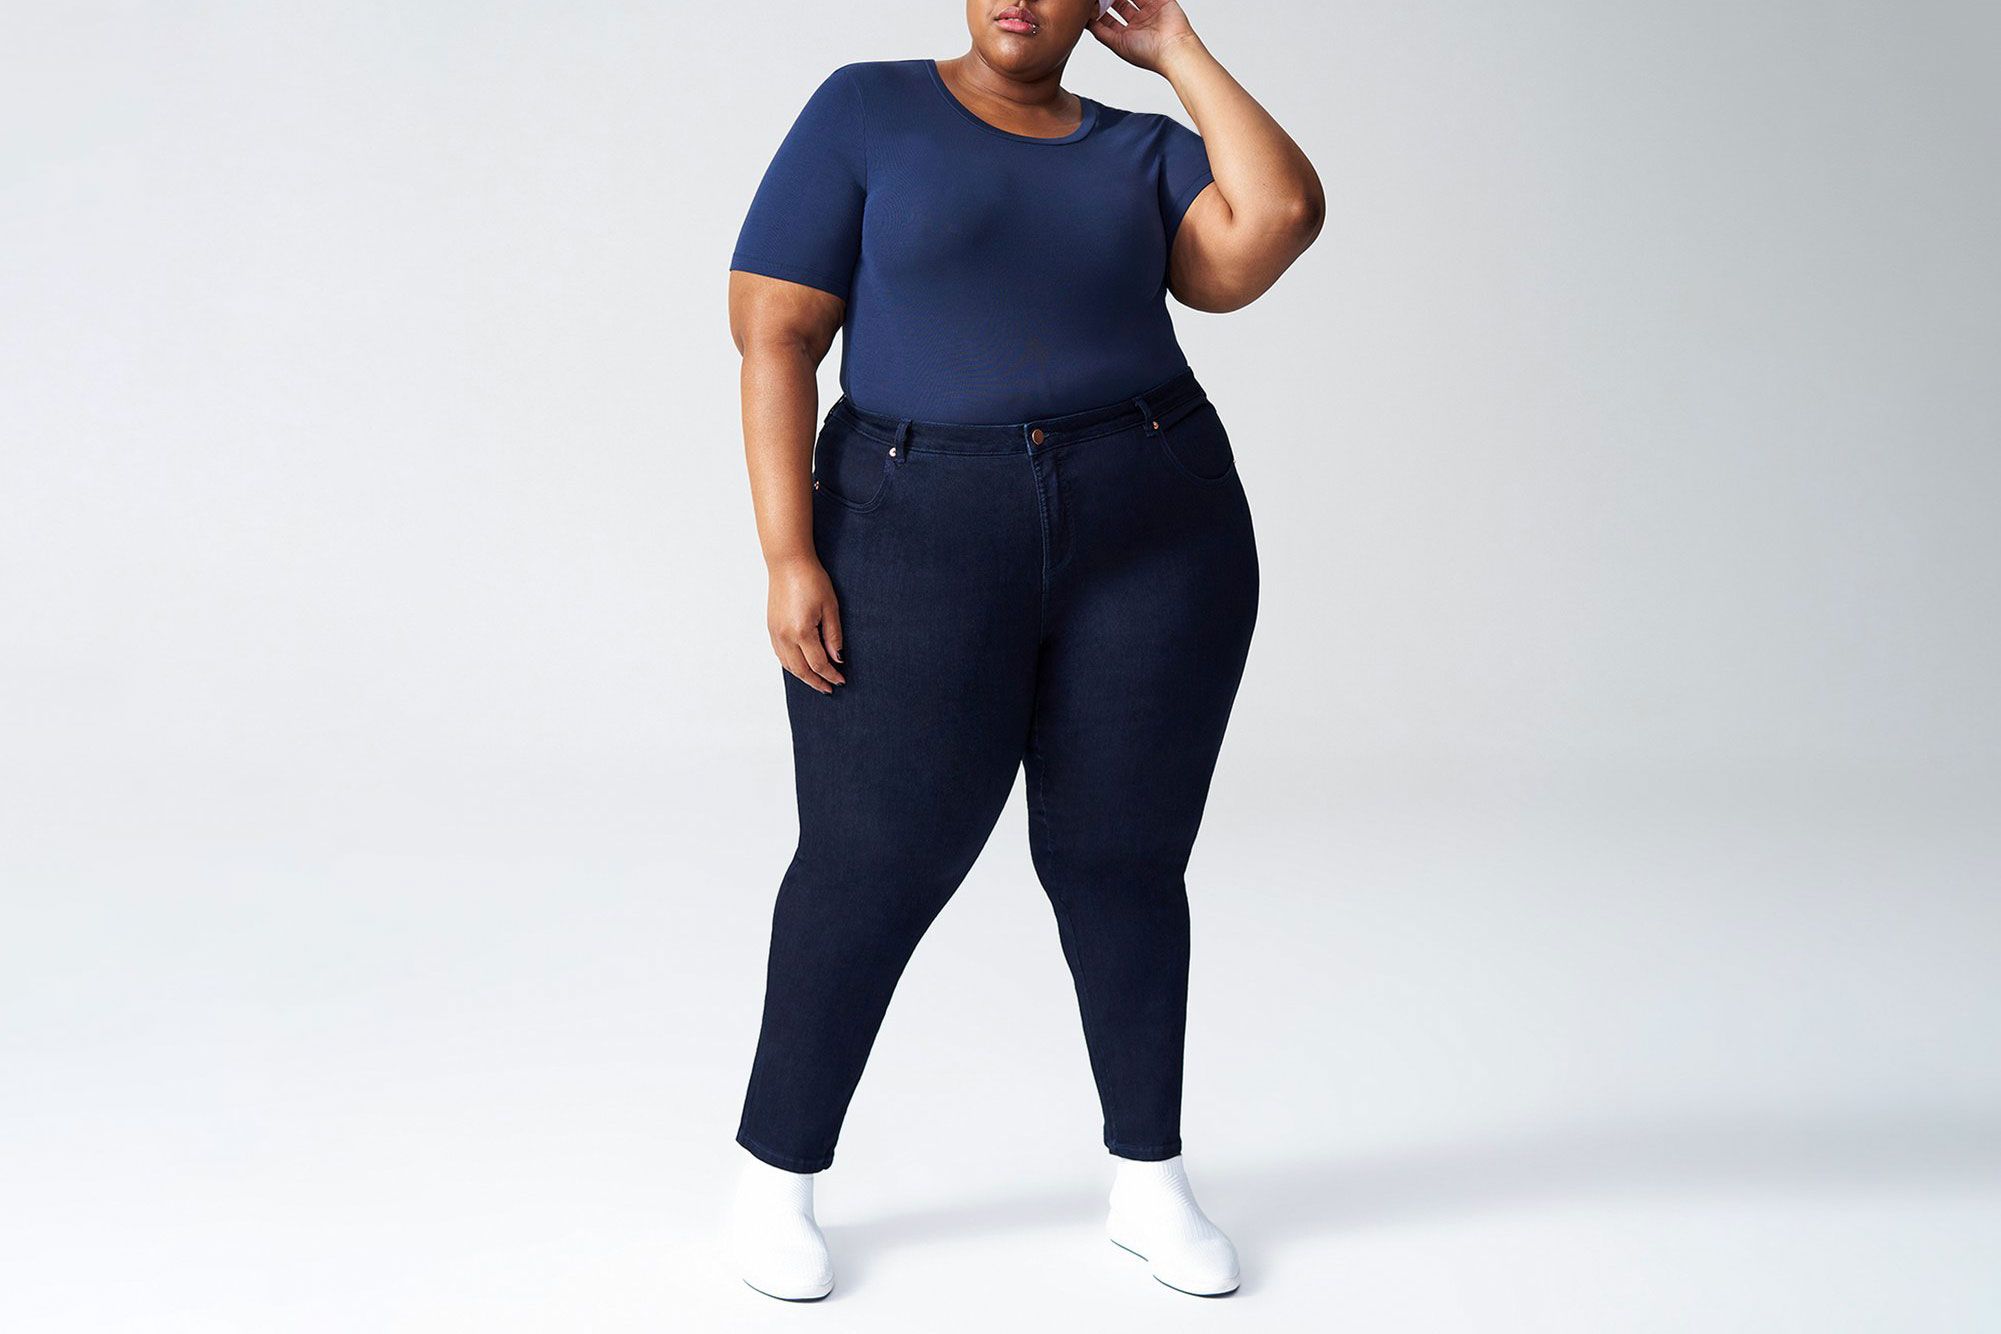 Universal Standard Clothing Review: A Size-Inclusive Brand